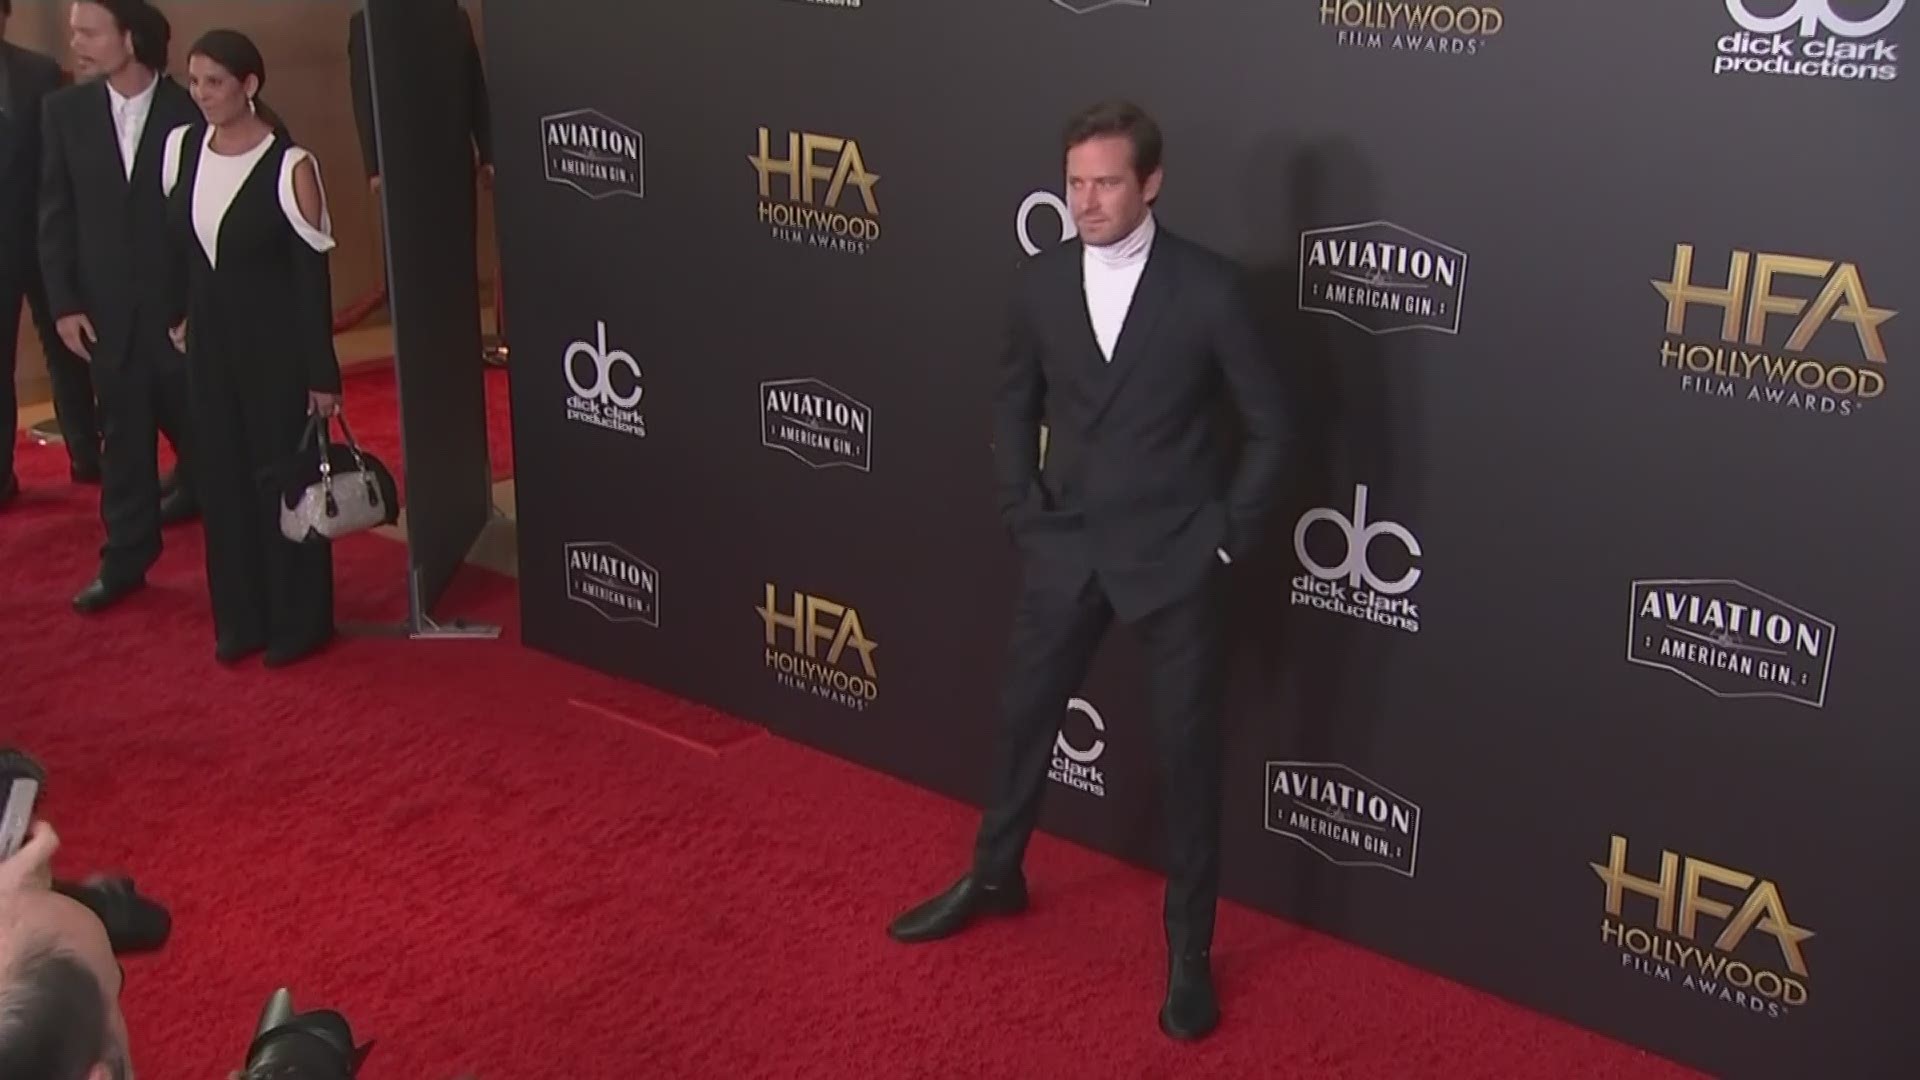 Various scenes of actor Armie Hammer on the red carpet, including actress Felicity Jones and ex-wife Elizabeth Chambers.